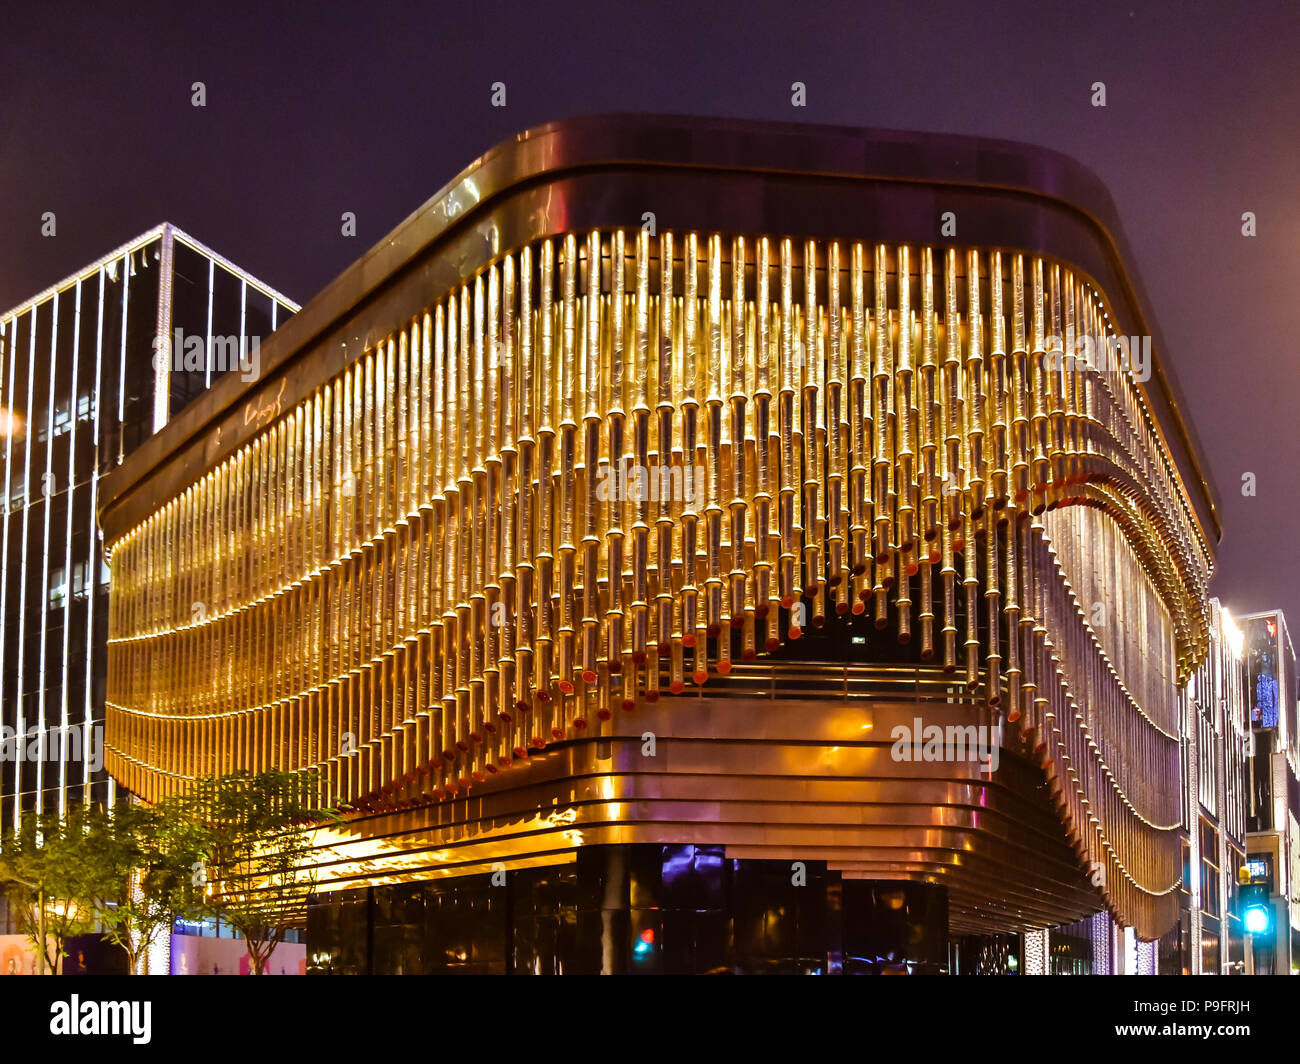 Shanghai, China - Apr. 24, 2018: Fosun Foundation cultural and arts center with moving curtain-like façade made of bronze tubes. Stock Photo